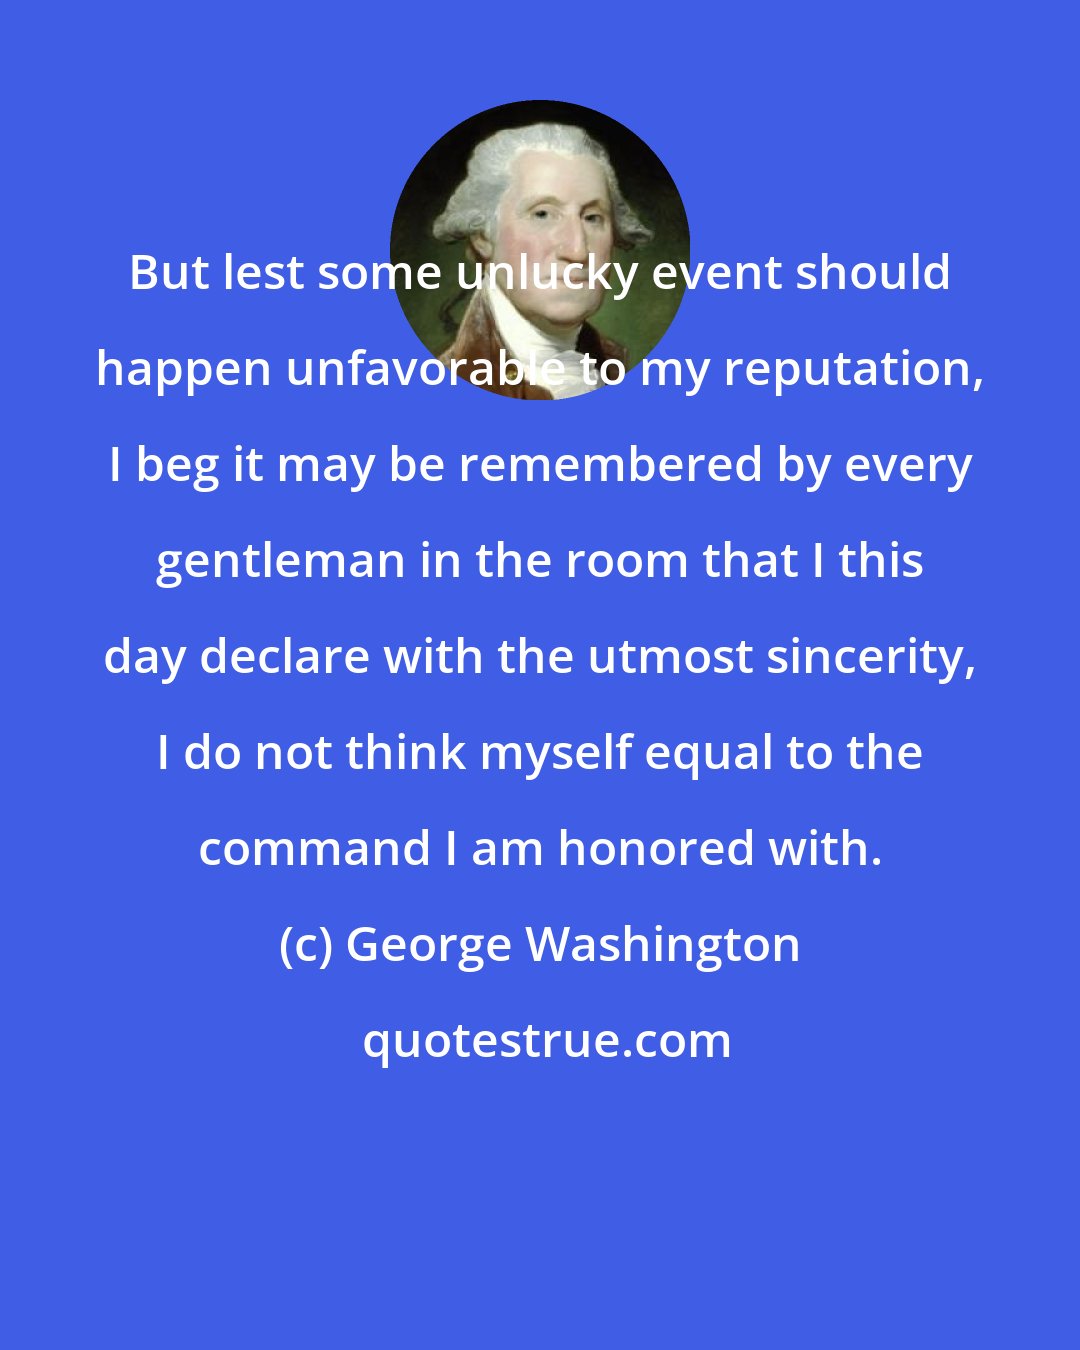 George Washington: But lest some unlucky event should happen unfavorable to my reputation, I beg it may be remembered by every gentleman in the room that I this day declare with the utmost sincerity, I do not think myself equal to the command I am honored with.